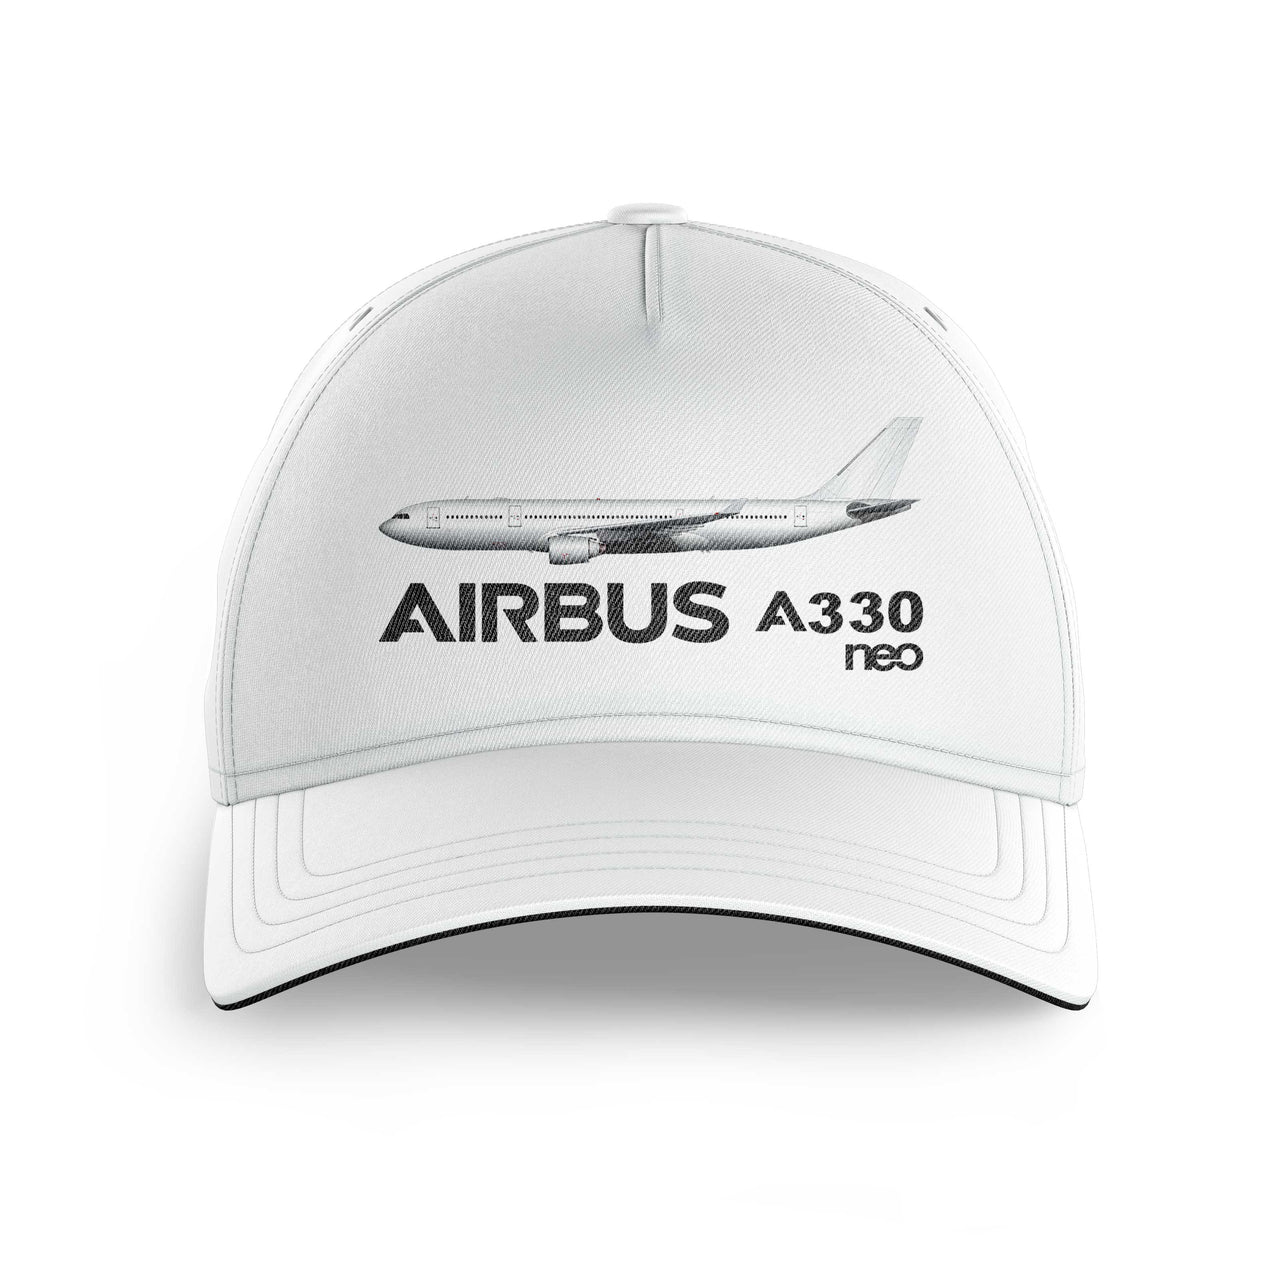 The Airbus A330neo Printed Hats